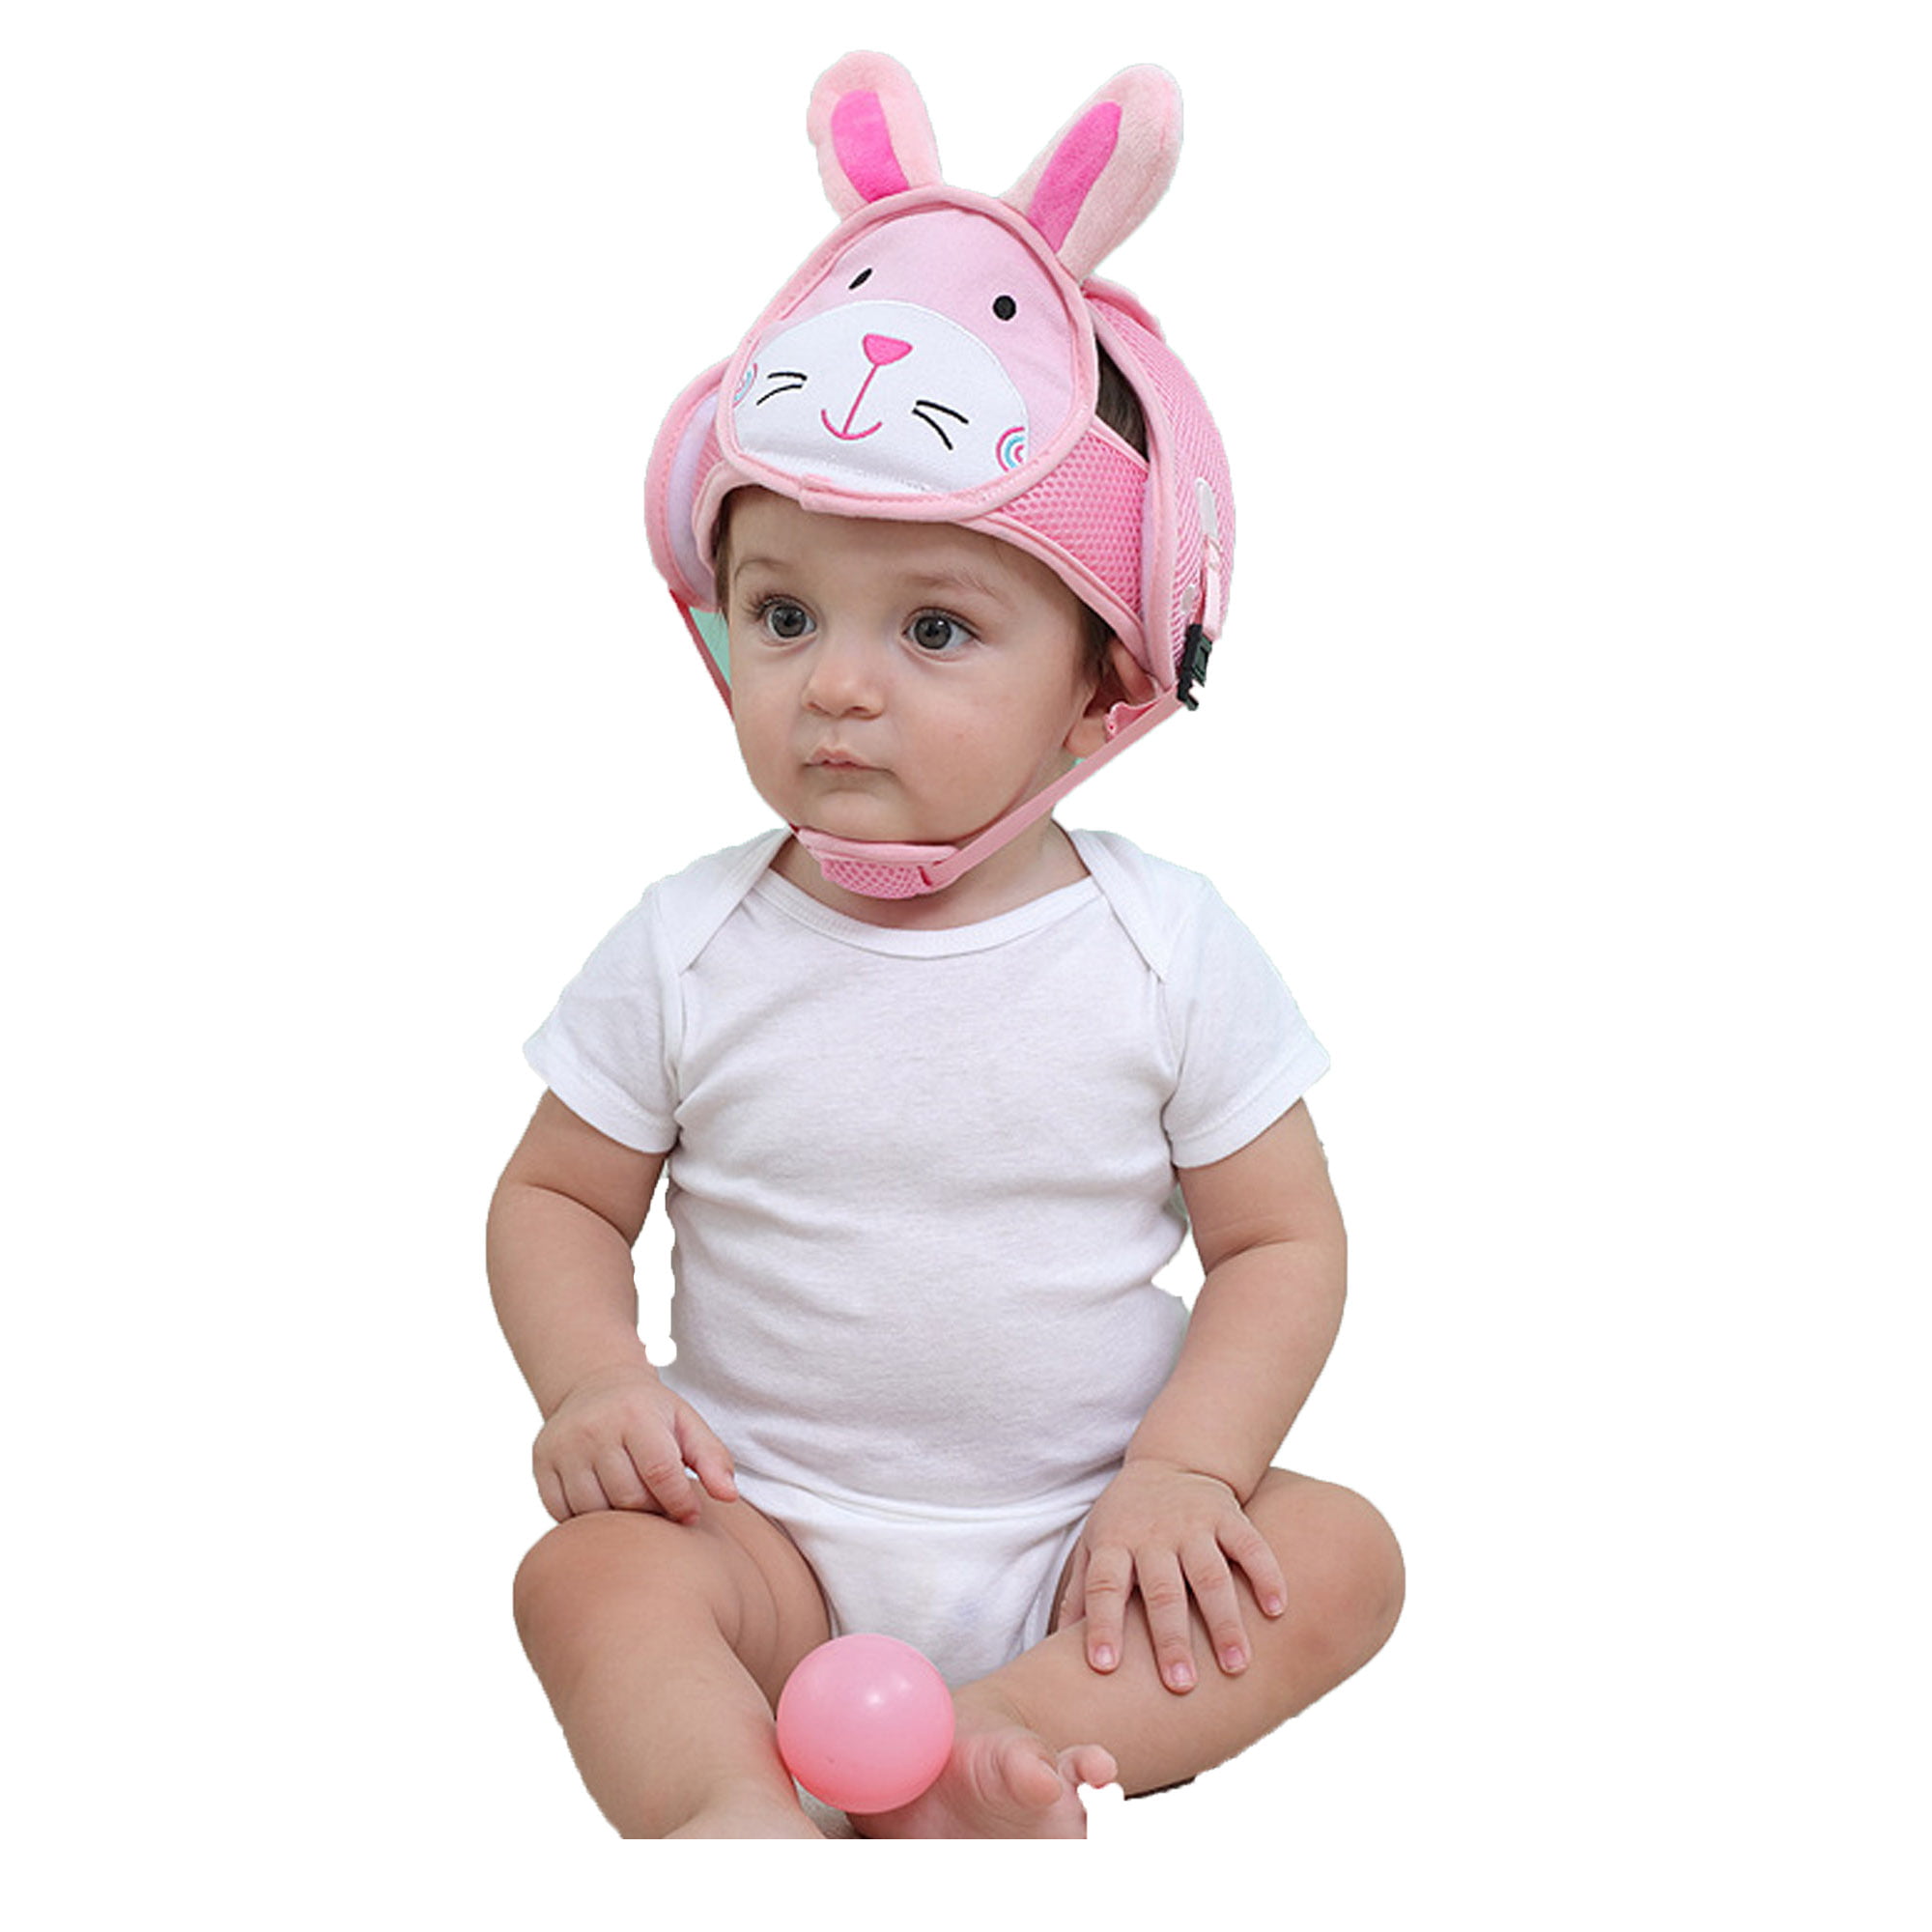 Infant Baby Toddler Safety Helmet Kids Head Protection Hat for Walking Crawling 